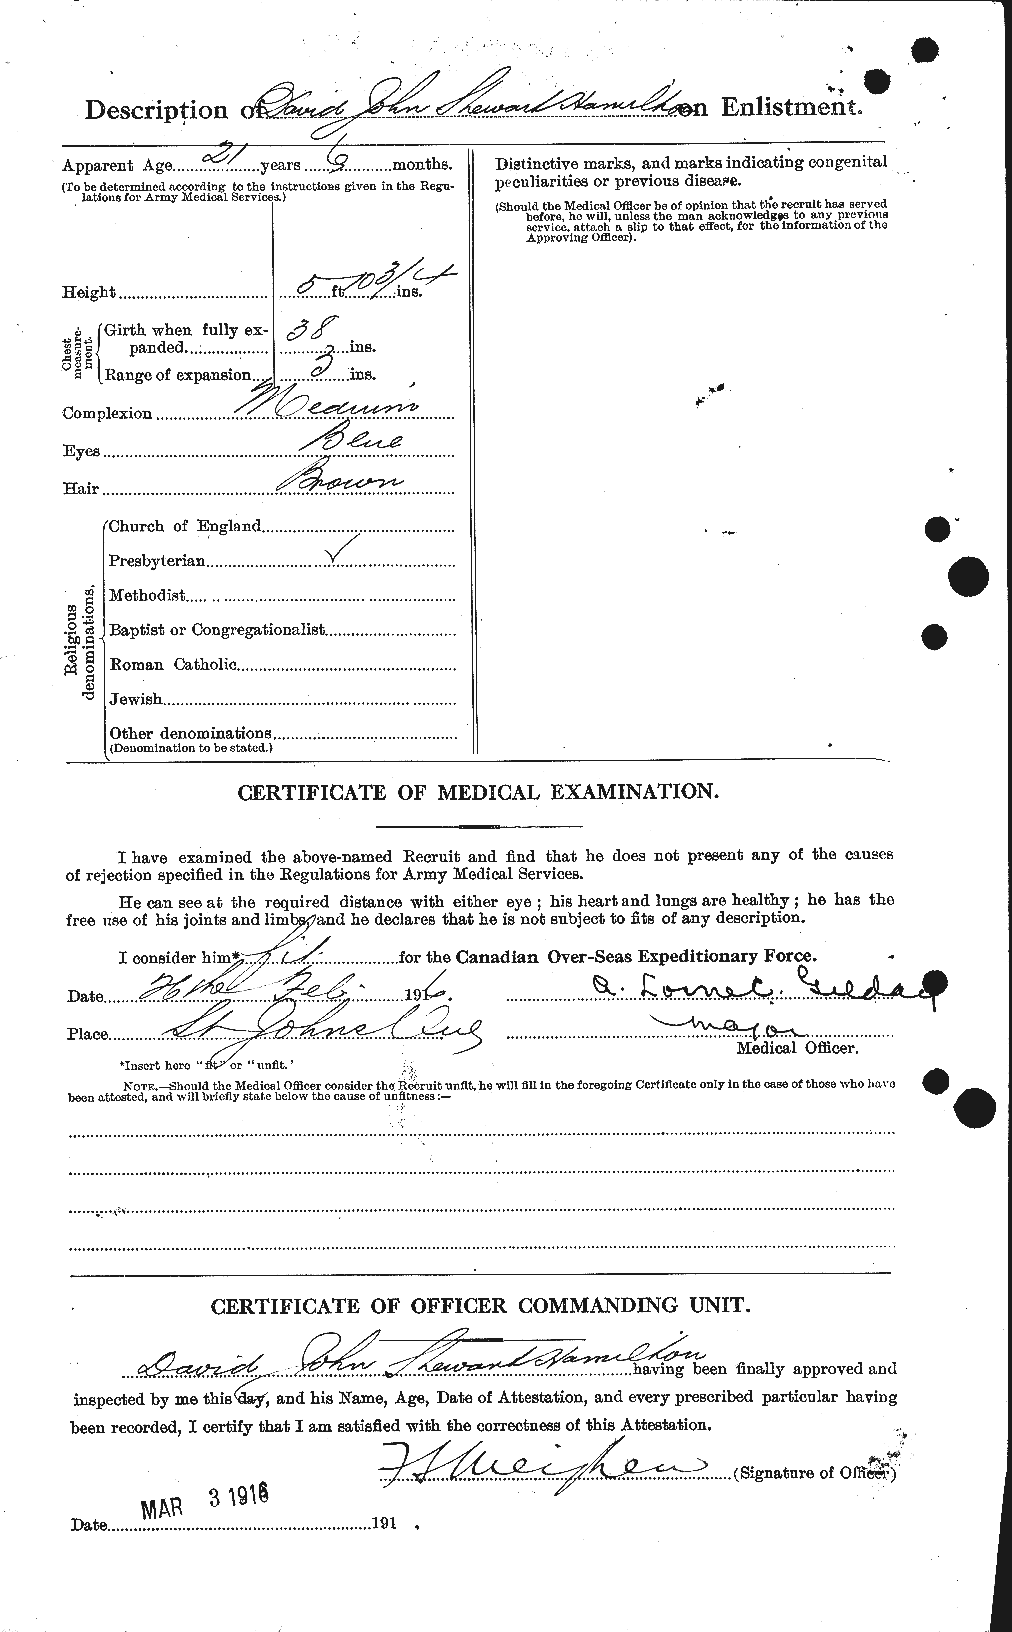 Personnel Records of the First World War - CEF 375350b